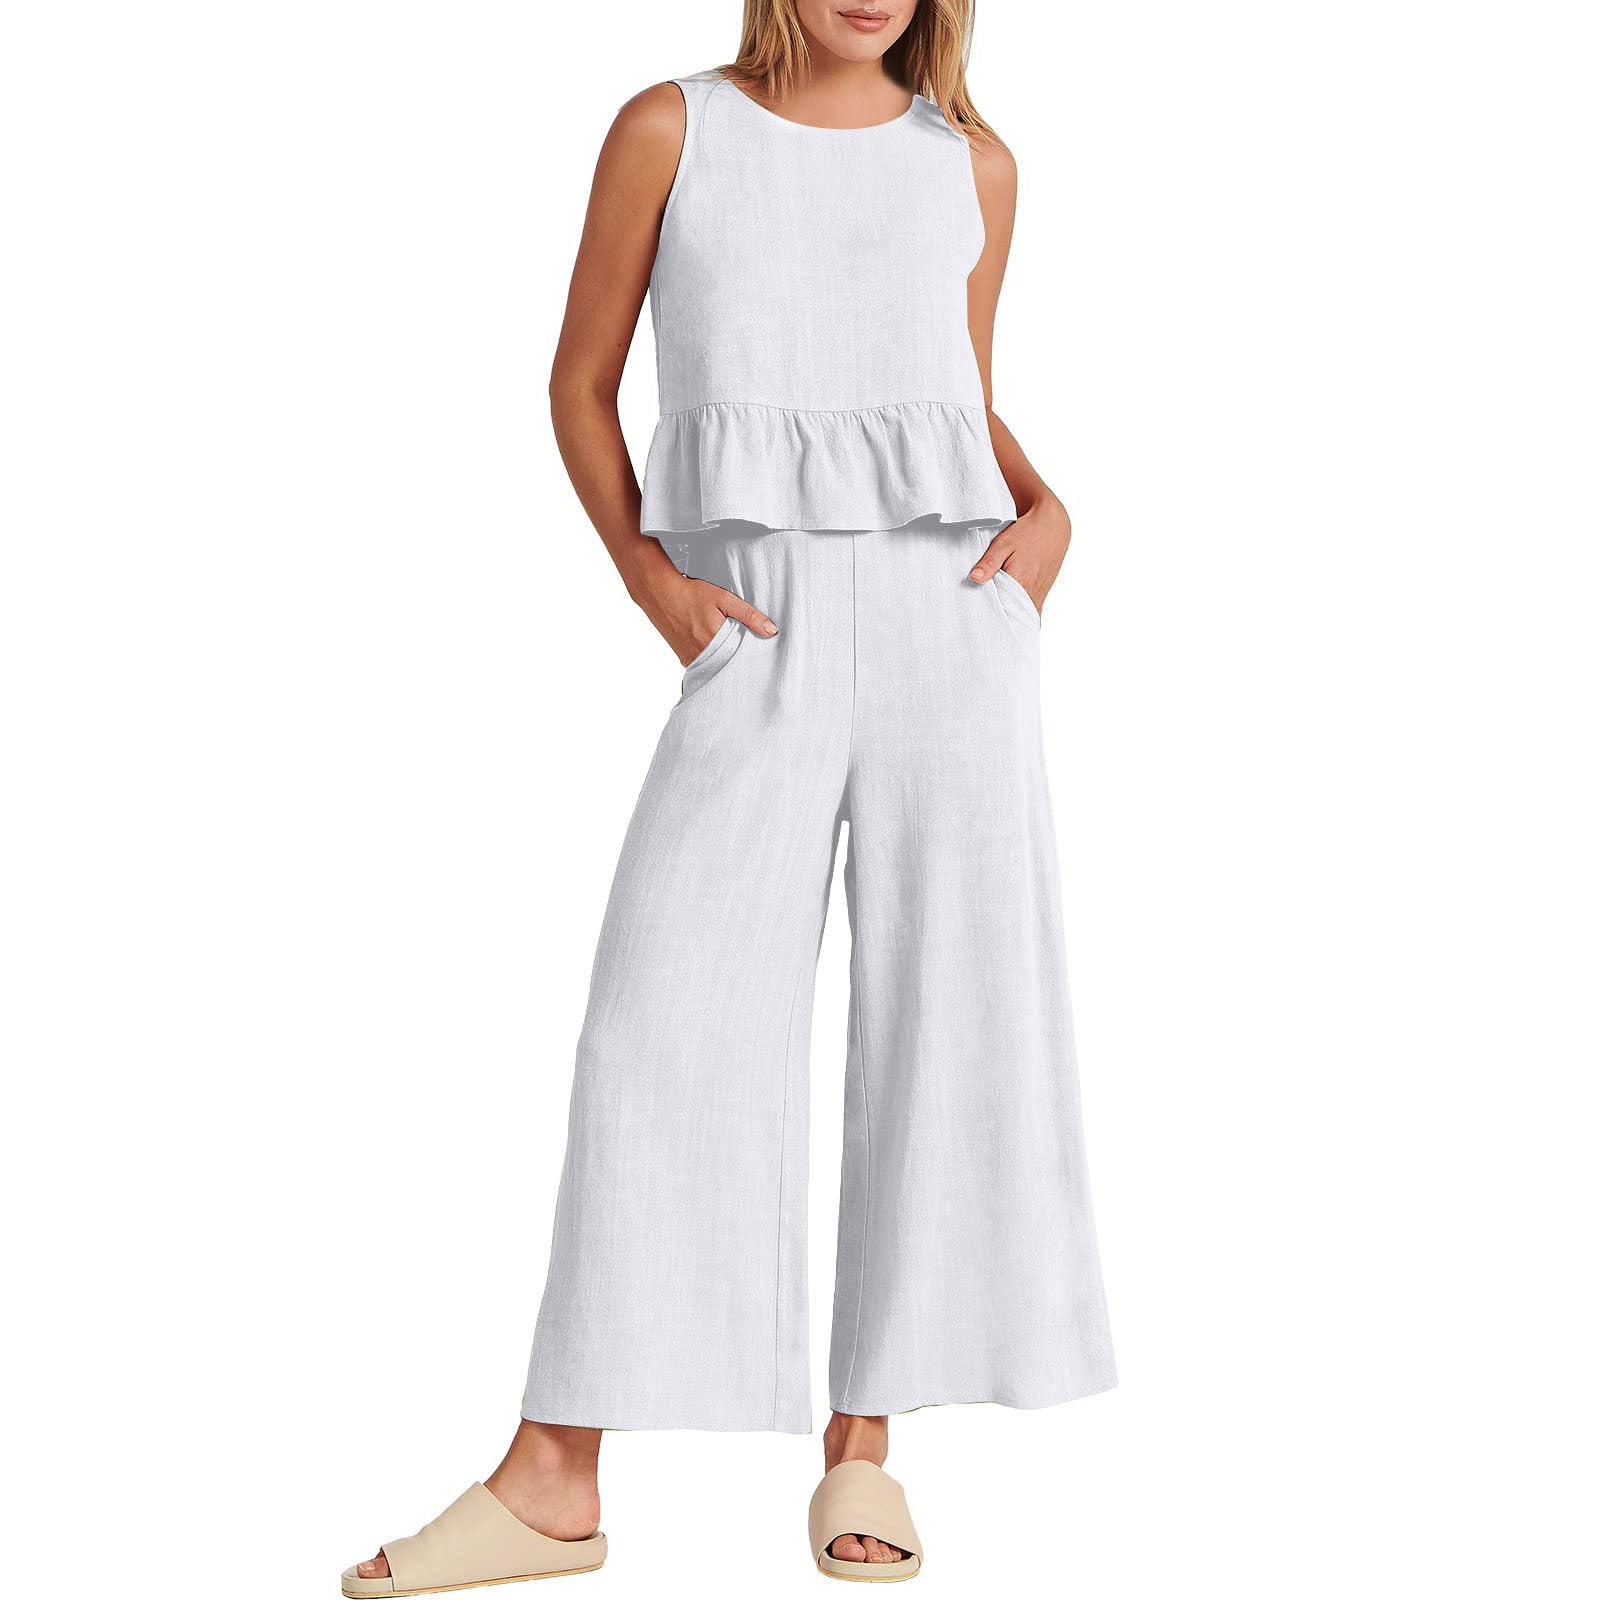 Women's Summer Ruffled Sleeveless Linen Solid Color Suits